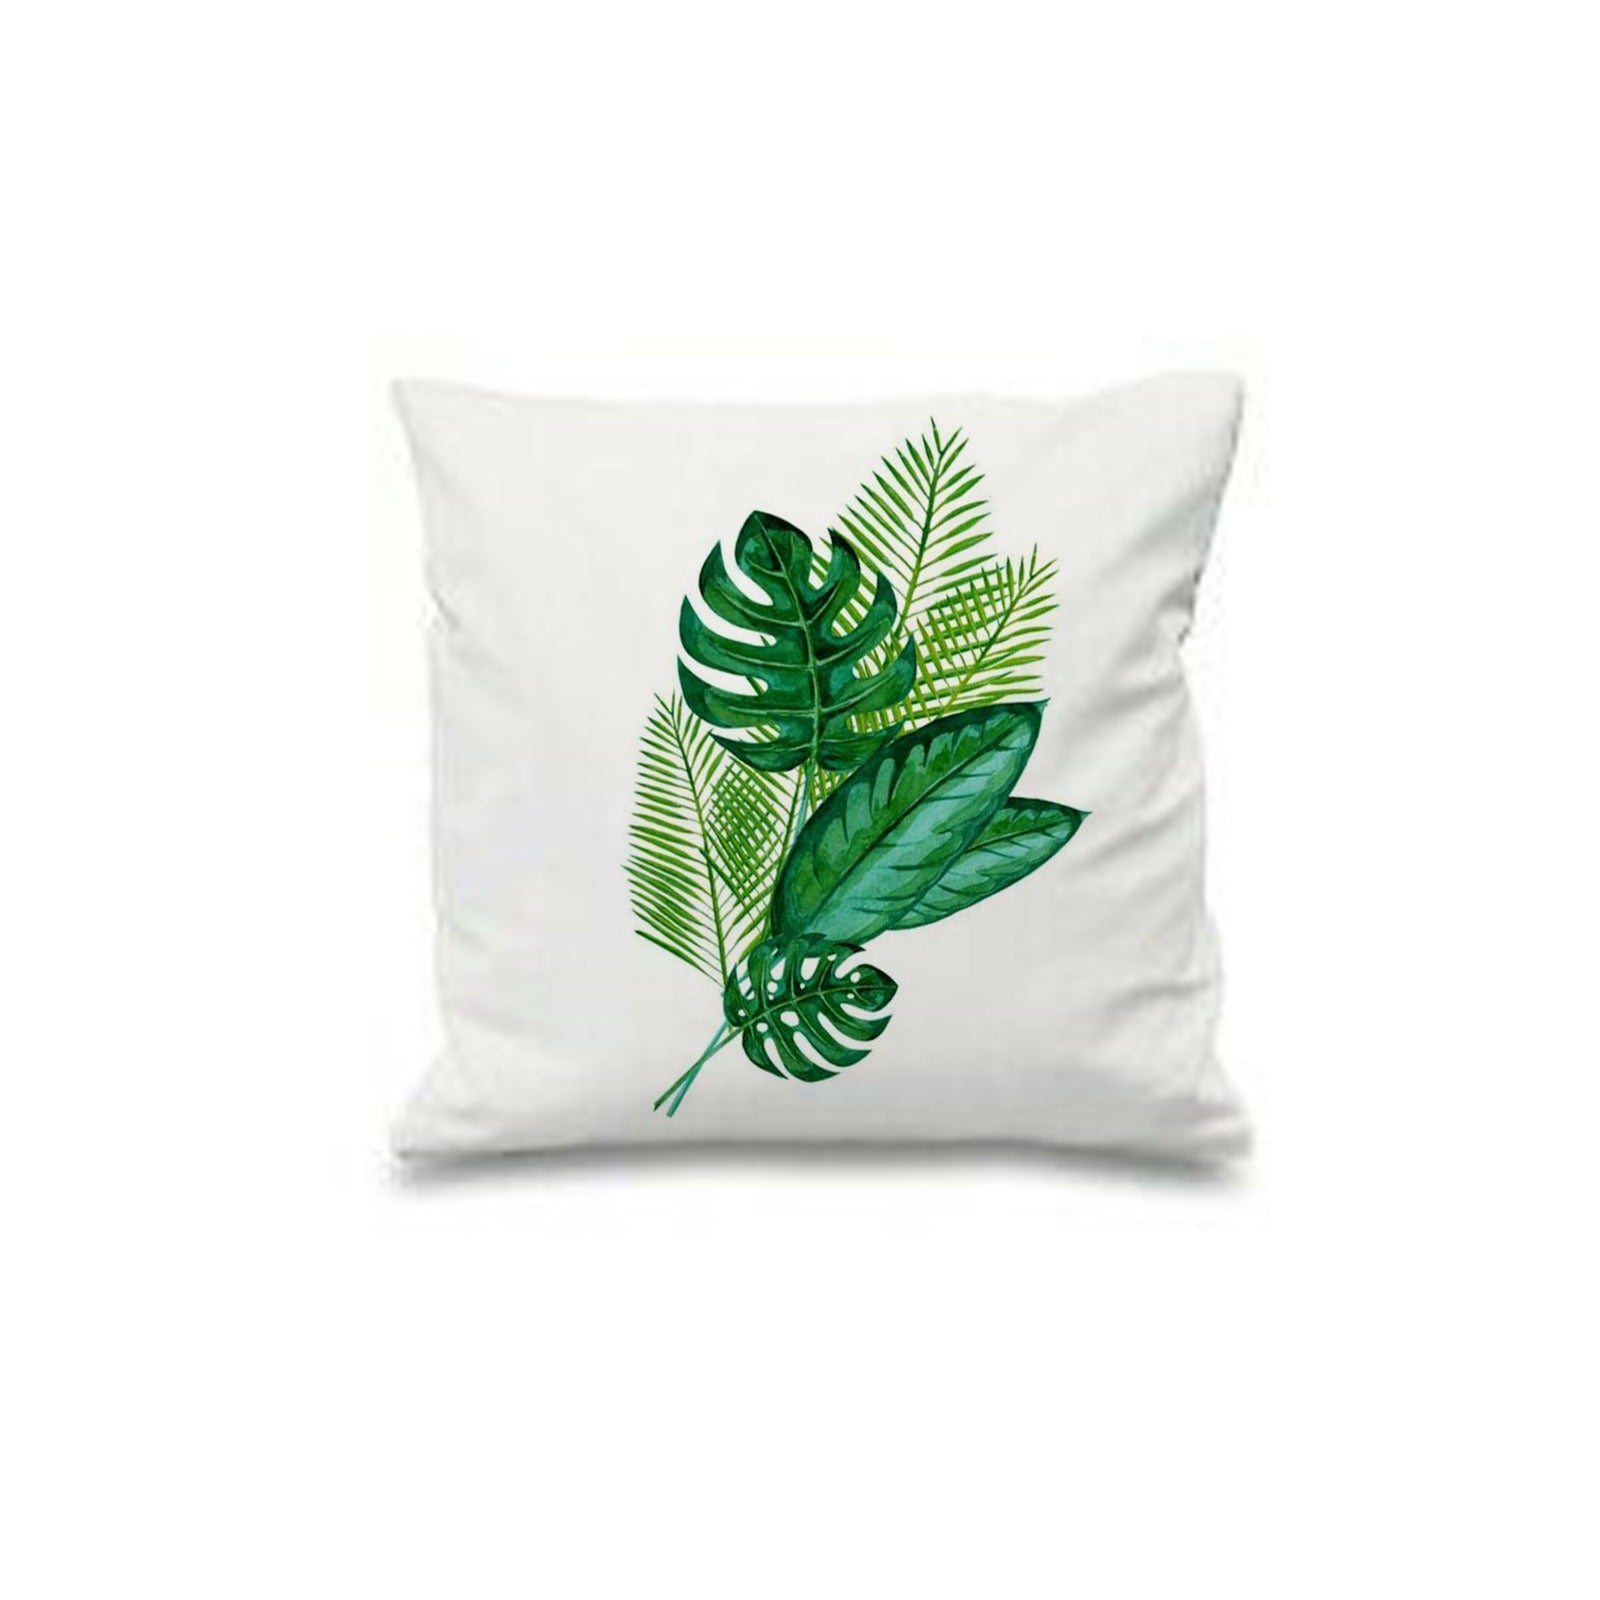 Golden Mostra Plant Cushion Covers Pack of 4